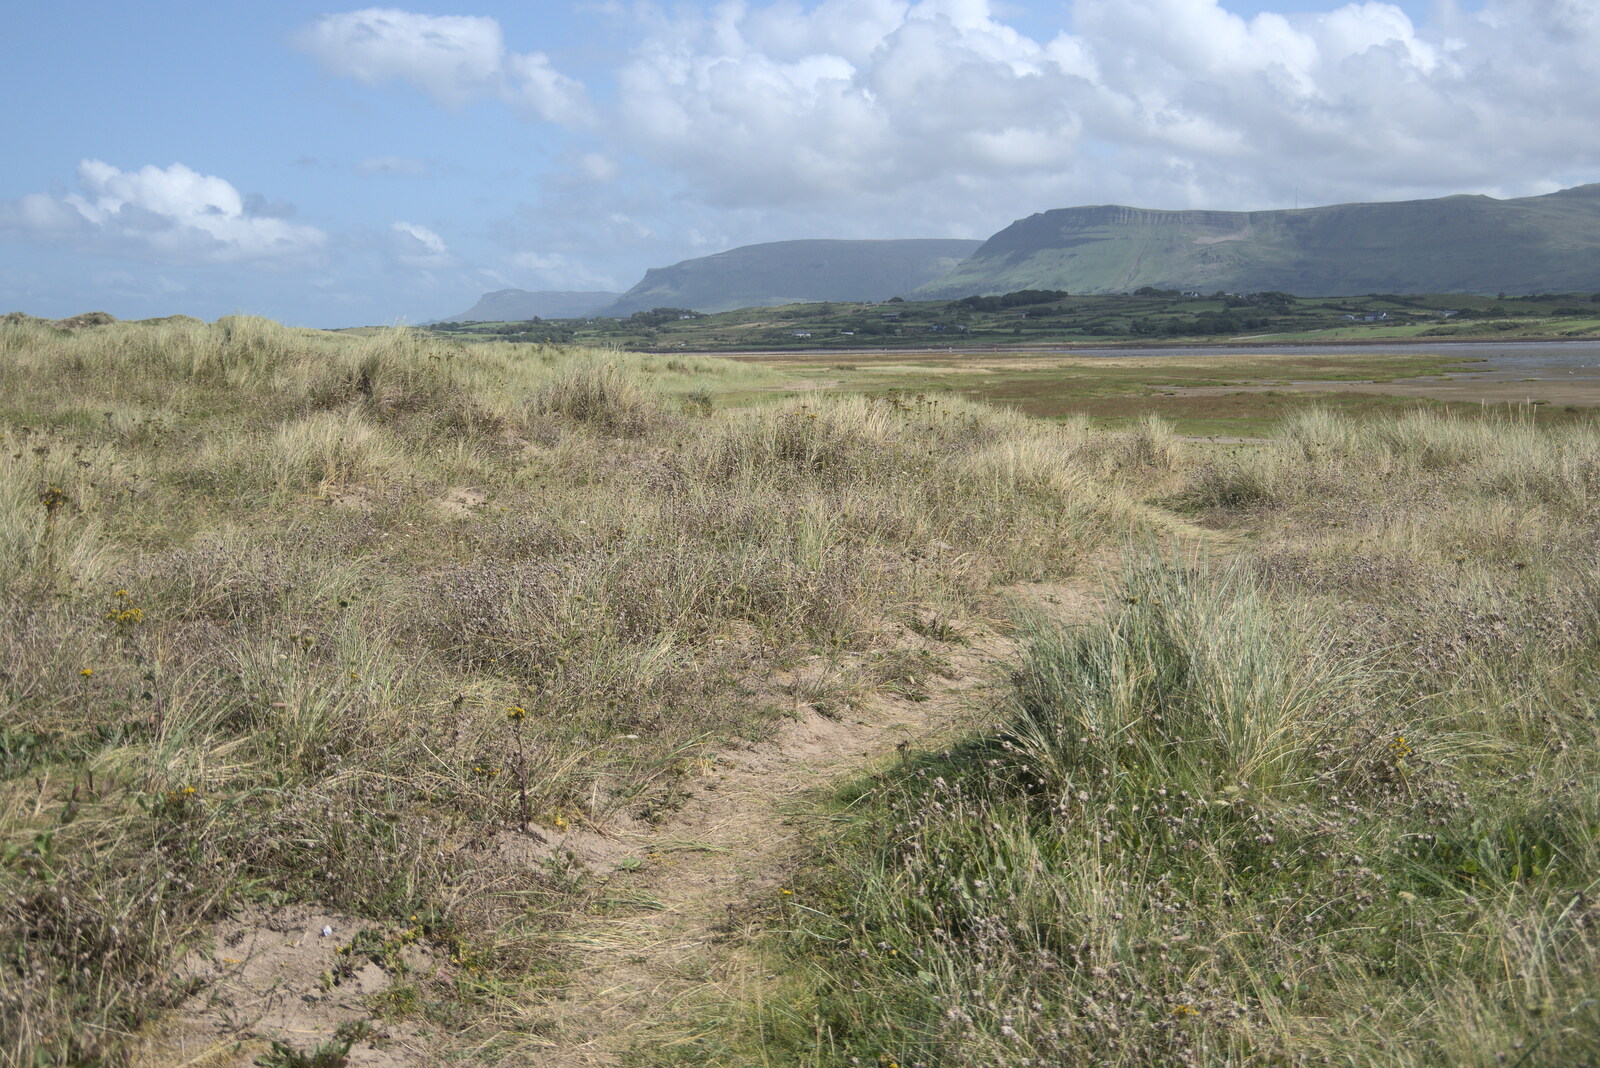 A Trip to Manorhamilton, County Leitrim, Ireland - 11th August 2021: Sand dunes and hills